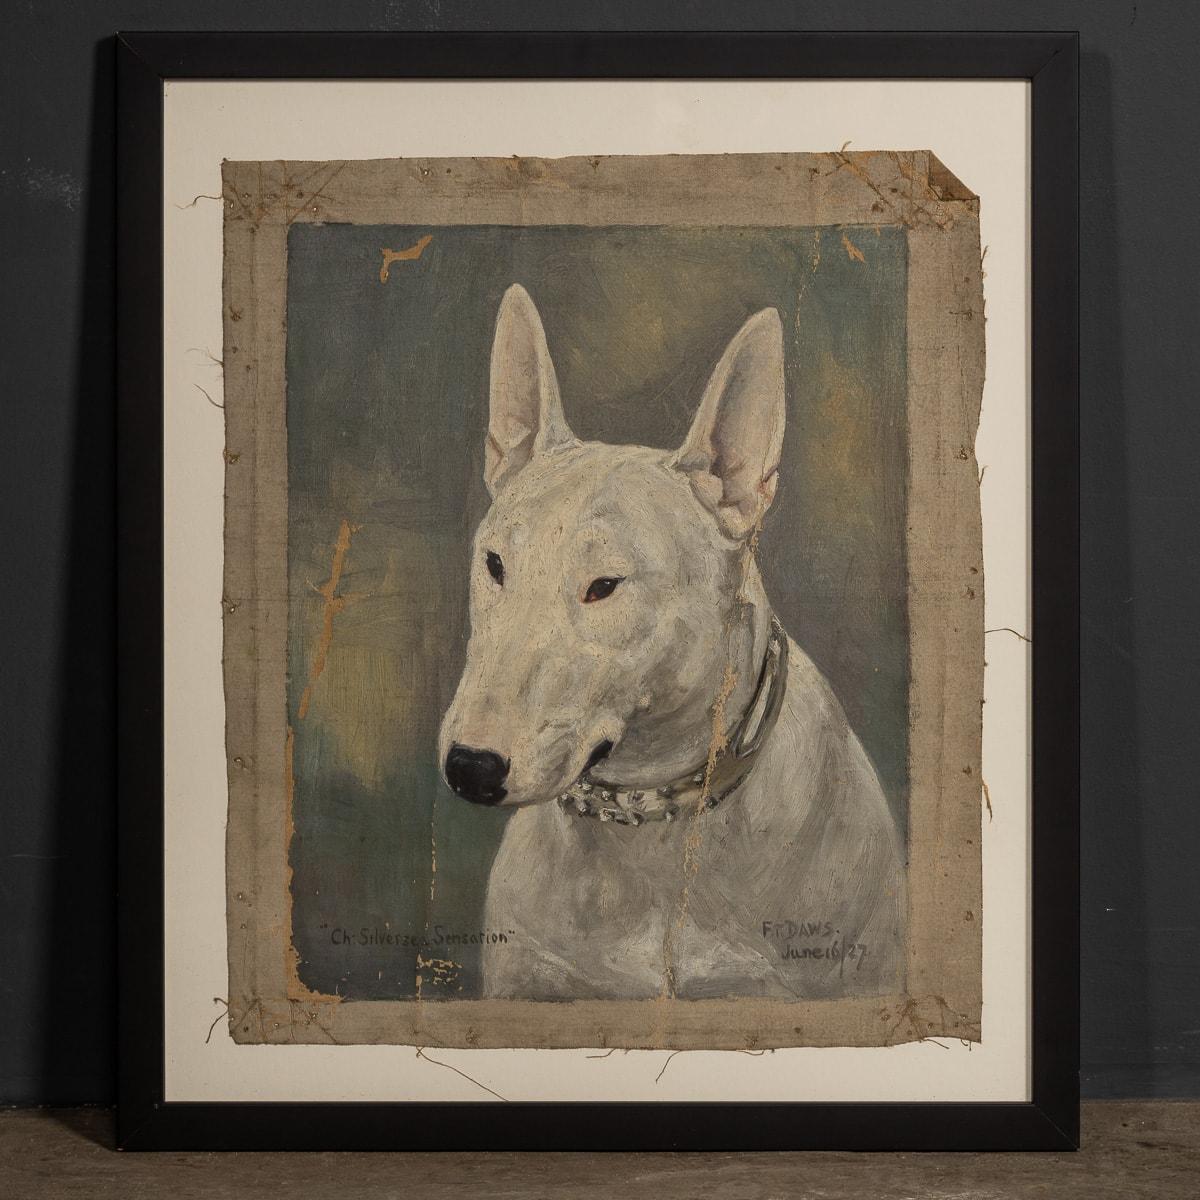 An antique 20th Century oil on canvas piece by Frederick Thomas Daws portraying an English Bull Terrier. Daws, famed for his depictions of champion dogs created this piece in the 1920's in England. This piece is signed F.T. Daws. This rare and